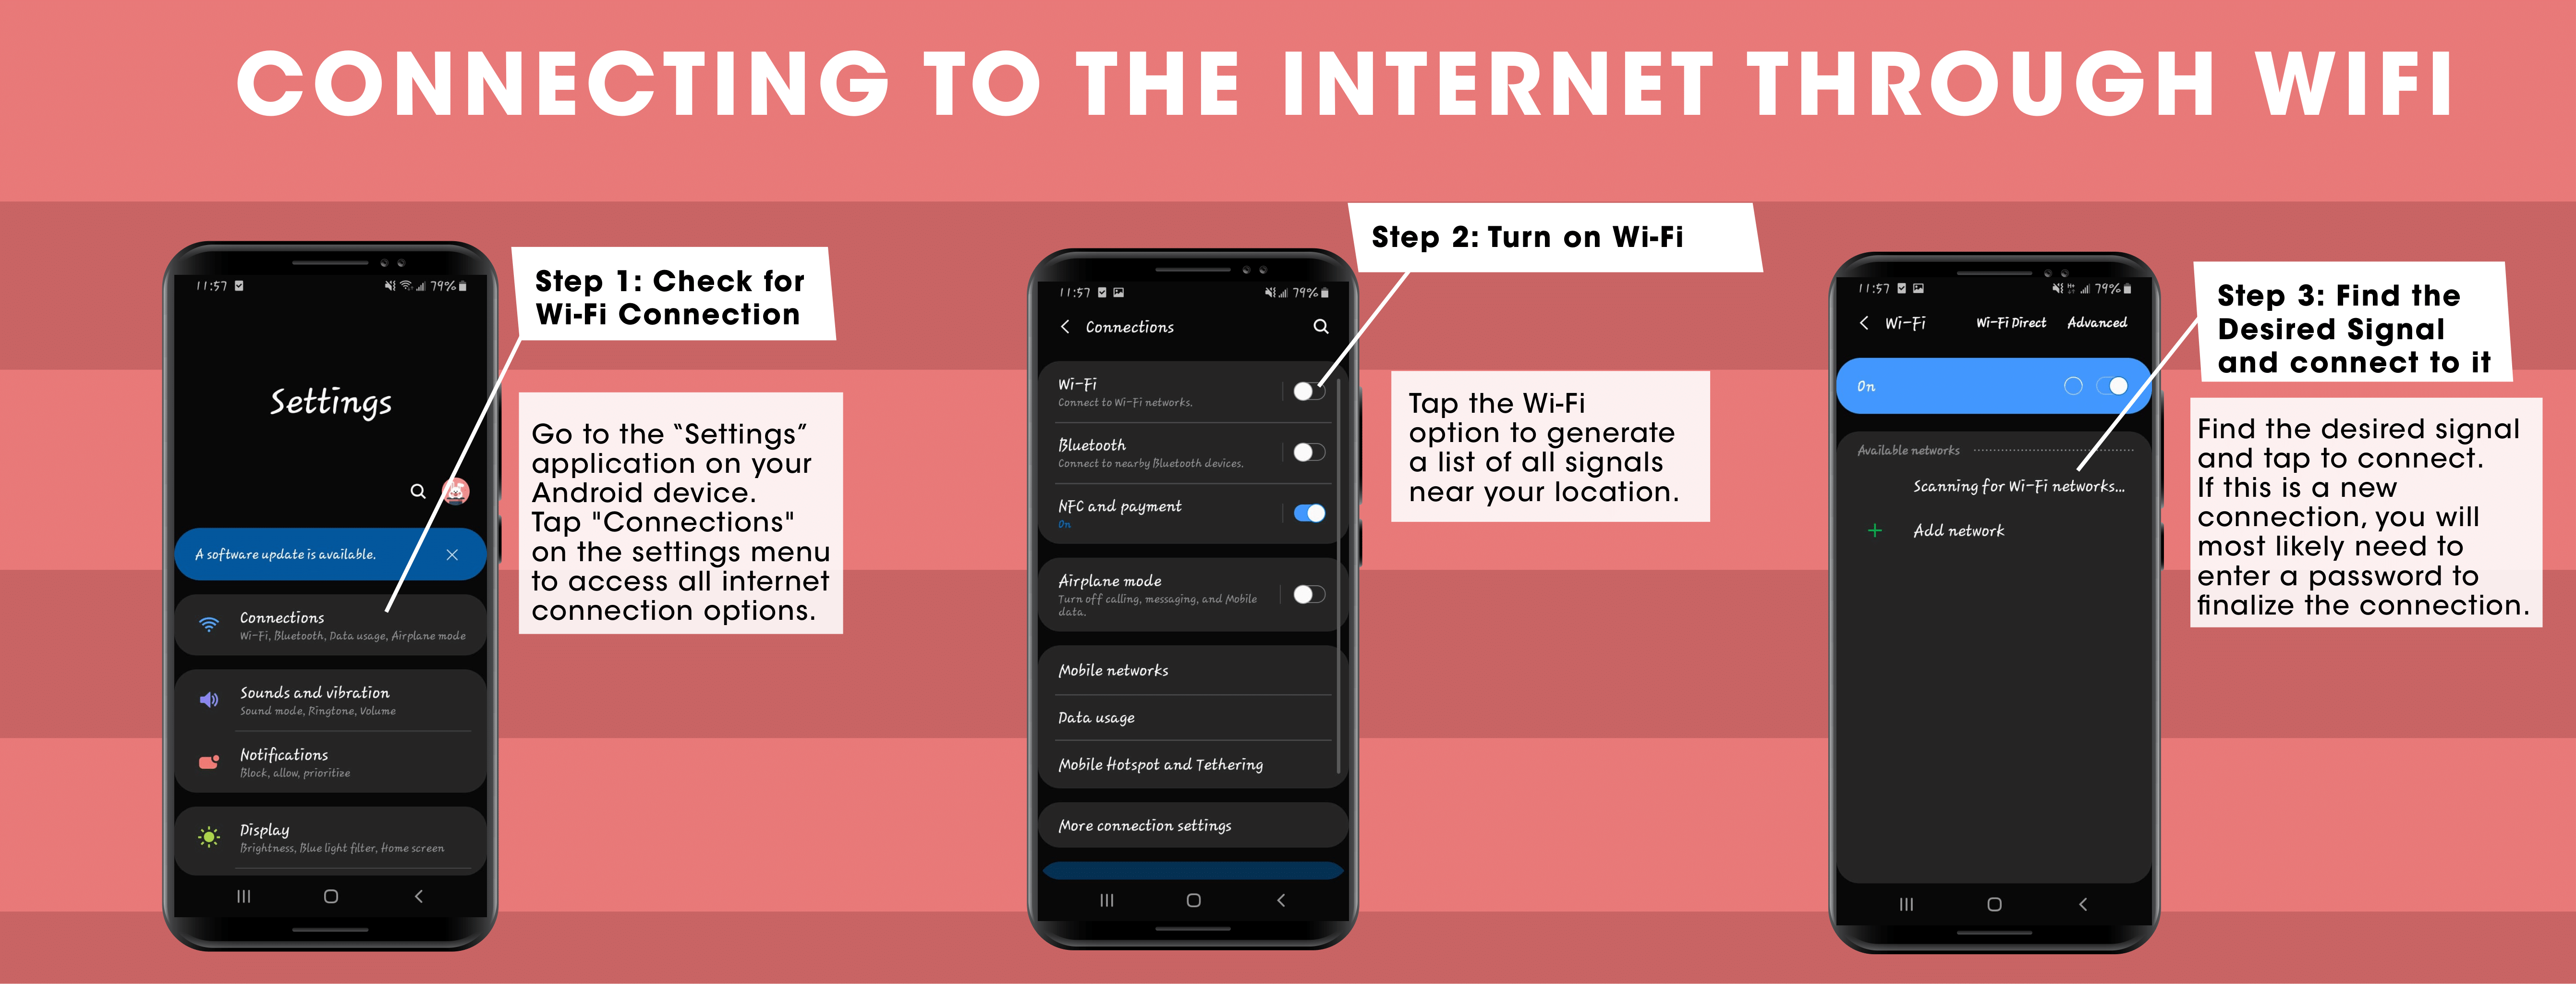 Graphic showing the steps needed to connect to the internet through Wi-Fi